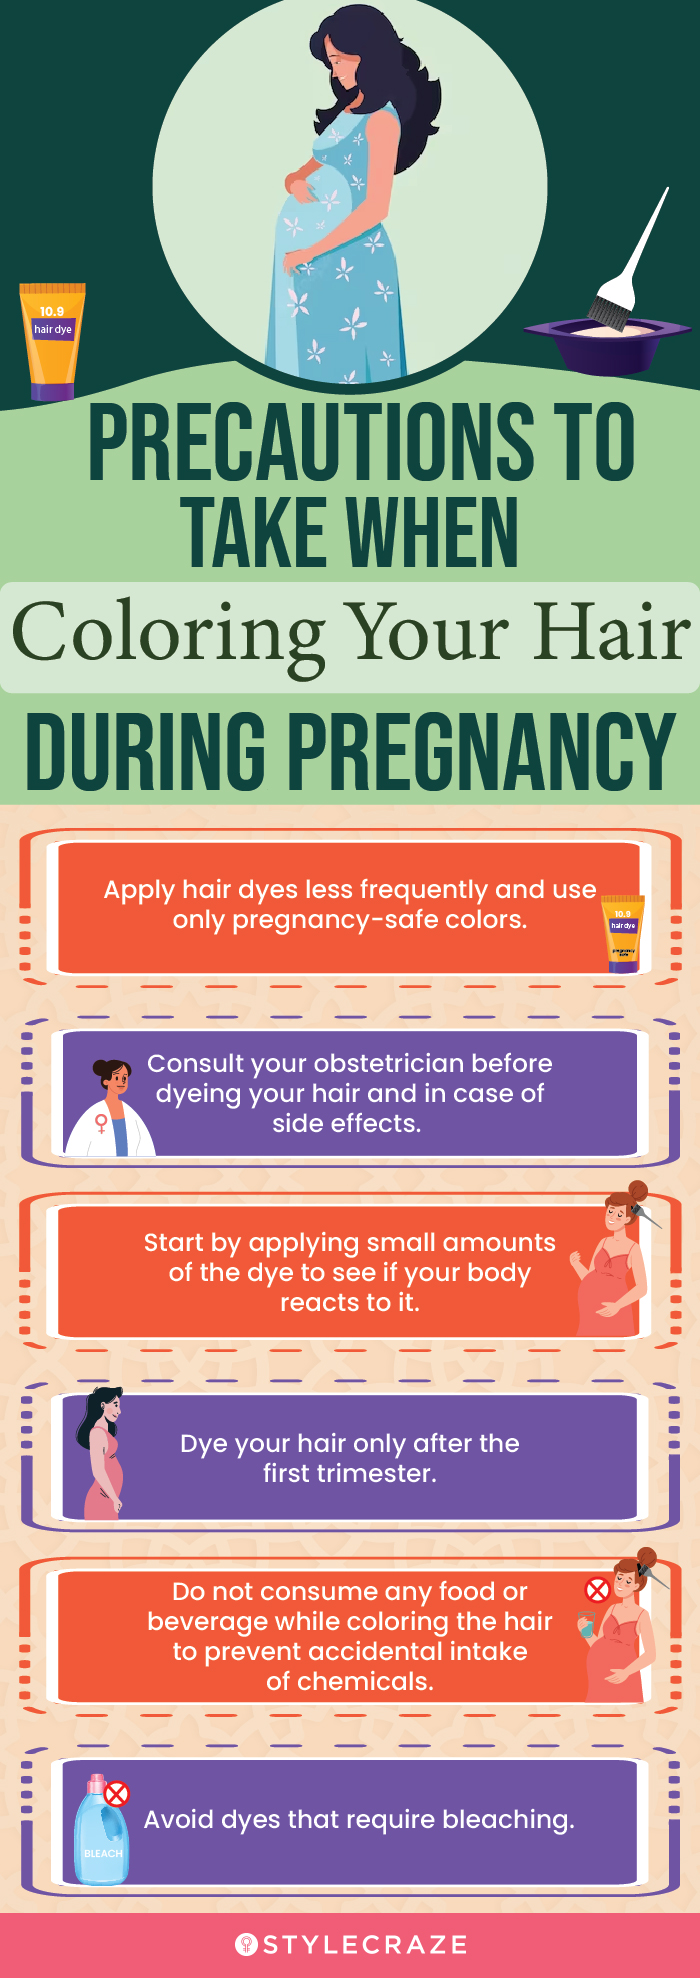 Precautions When Coloring Hair During Pregnancy (infographic)